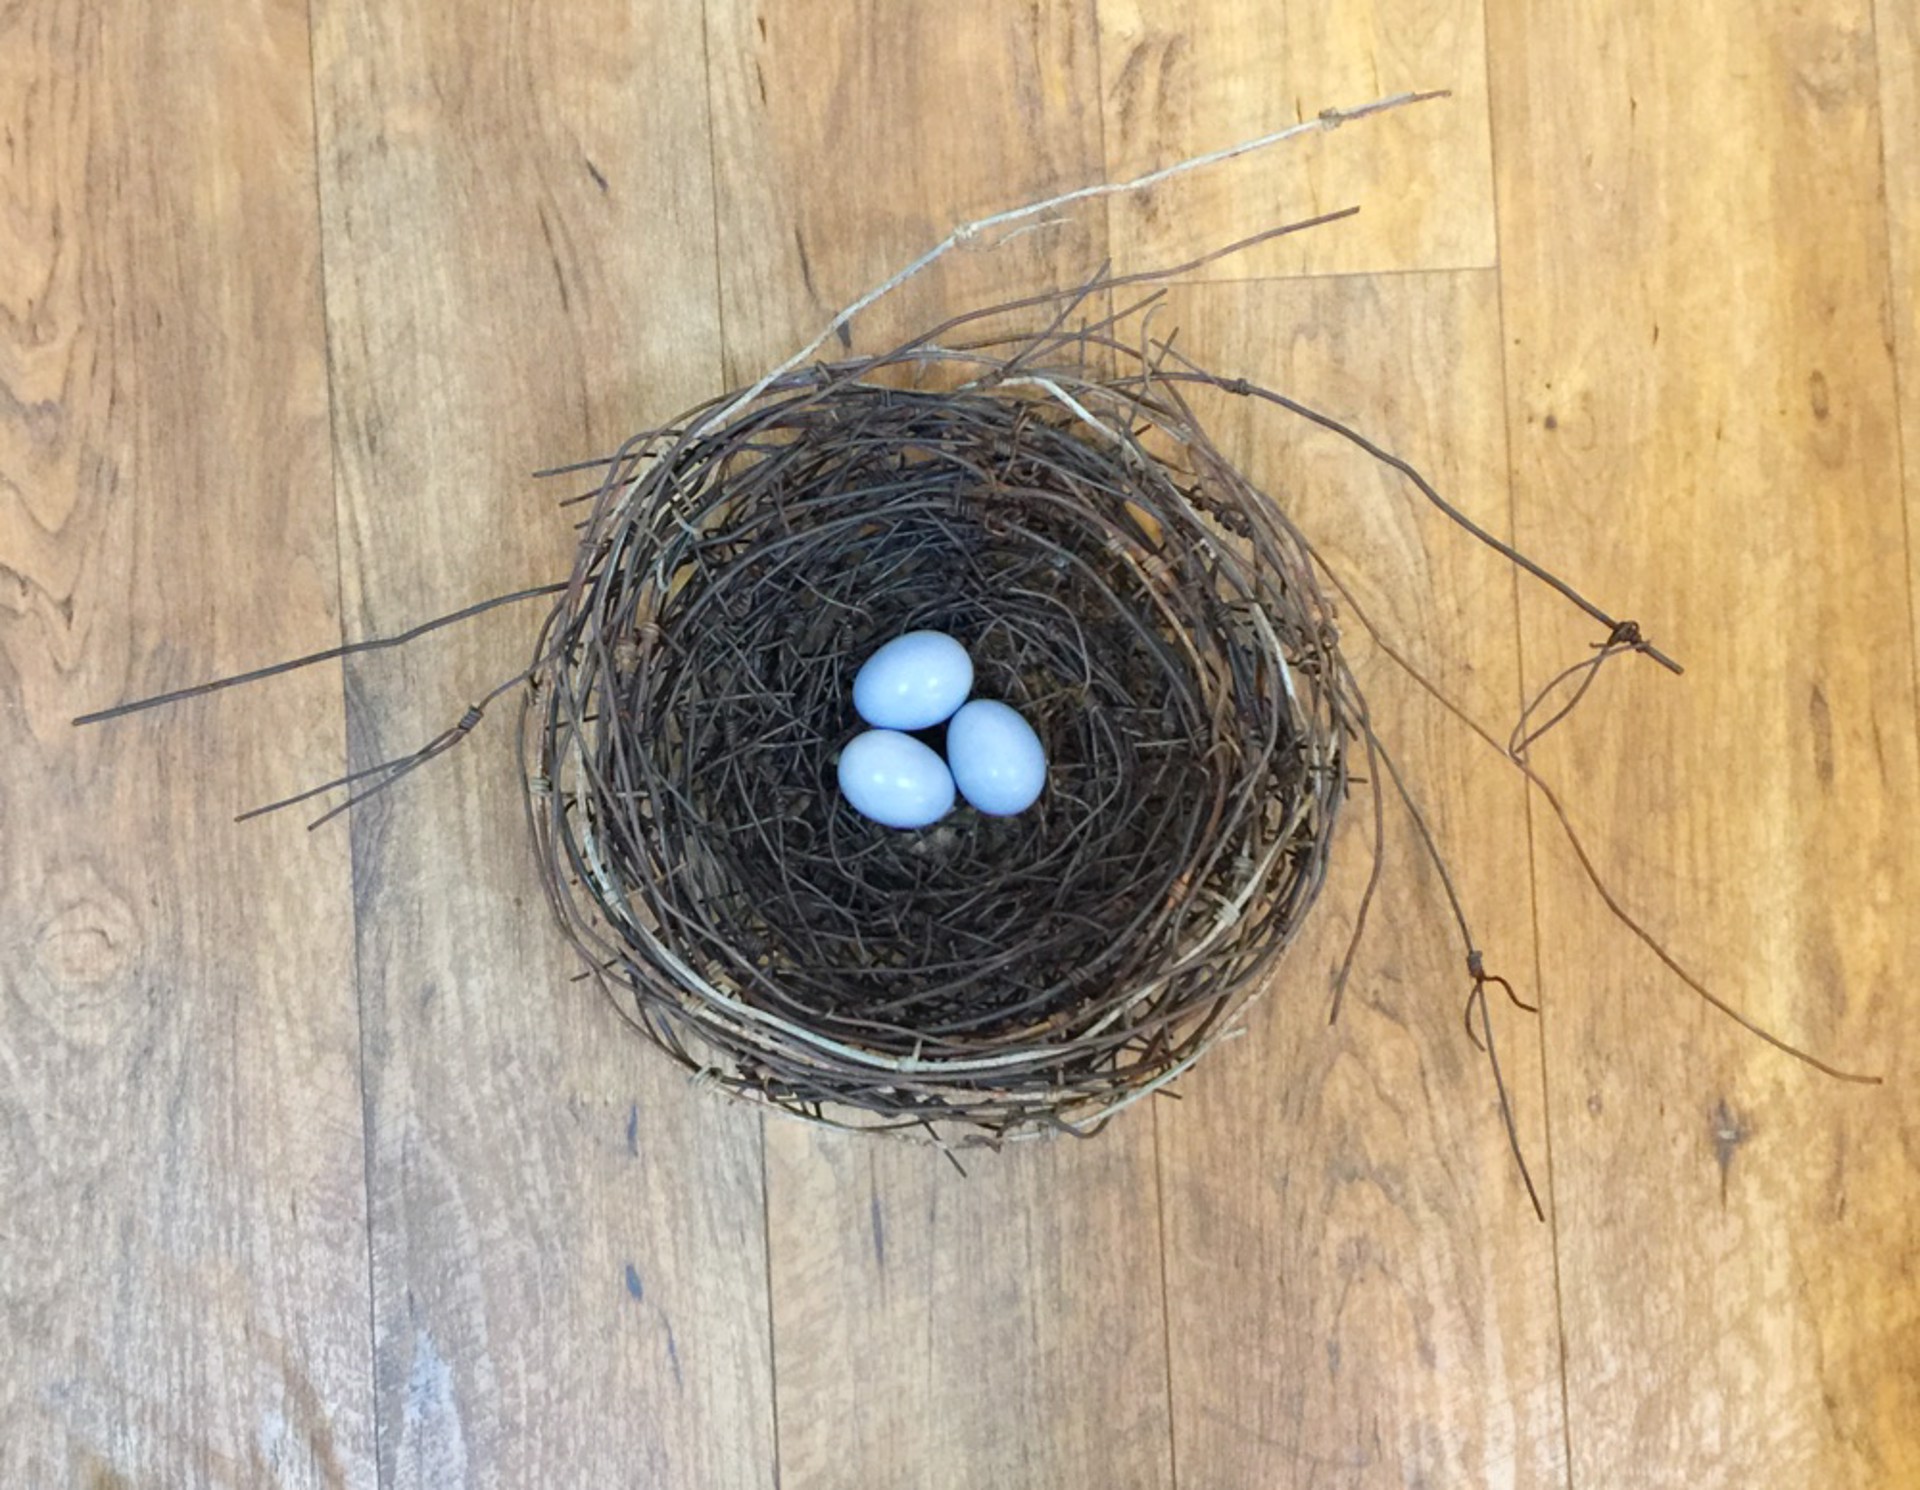 Hand Woven Wire Nest With 3 Light Turquoise Ceramic Eggs - 1336 by Phil Lichtenhan